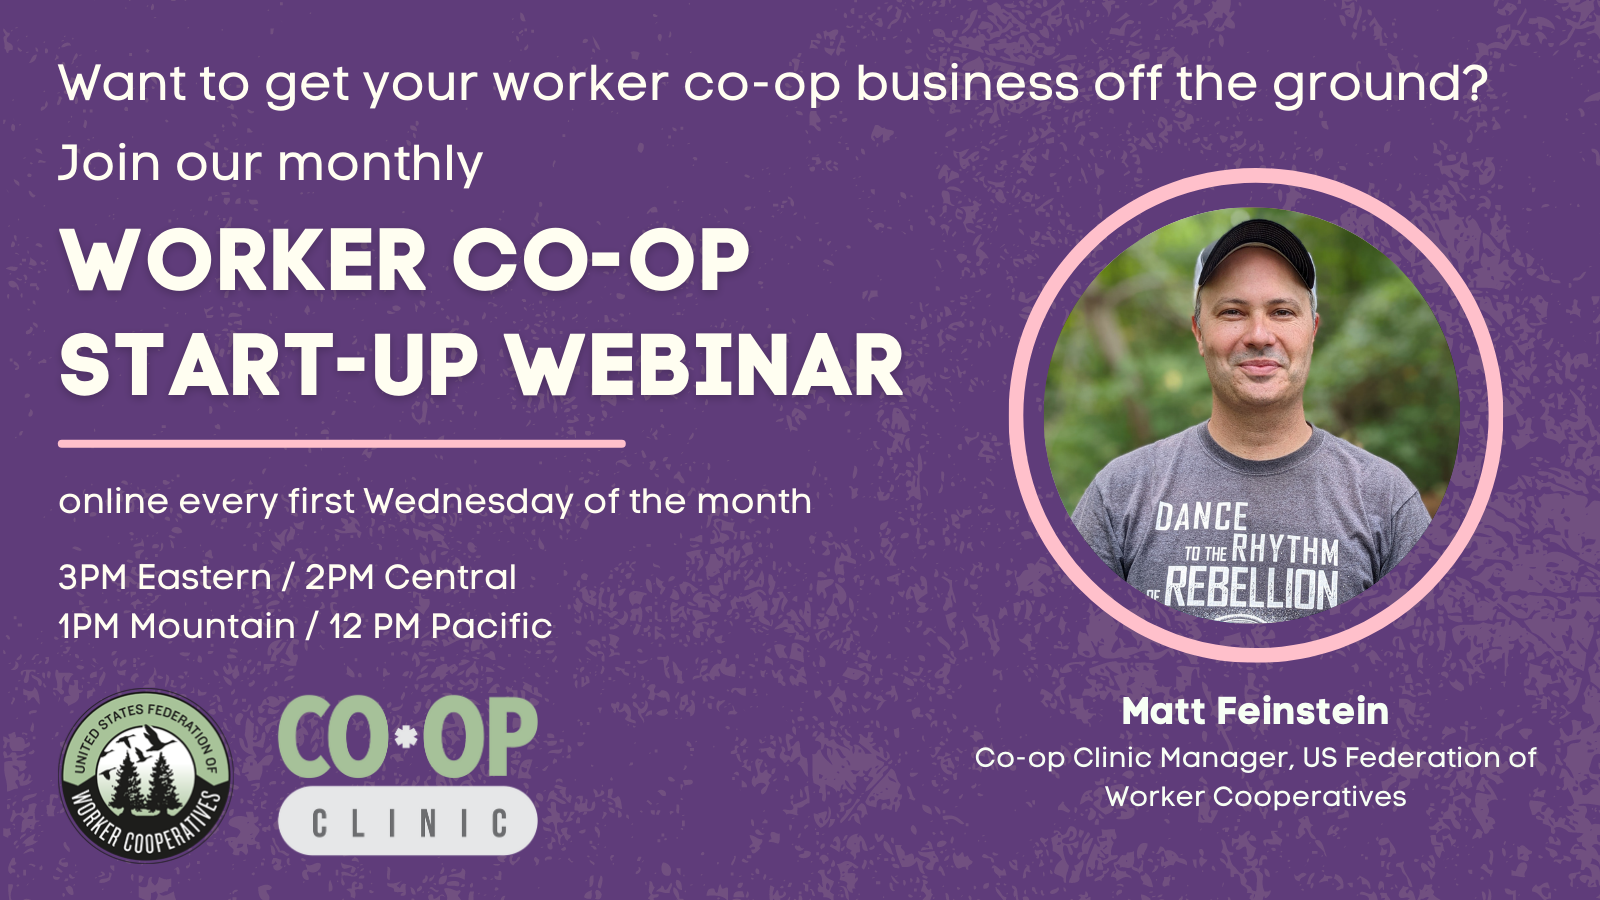 A graphic with a headshot of Co-op Clinic Manager Matt Feinstein who has white skin and short hair covered by a baseball cap, wears a gray t-shirt and smiles at the camera. Text that reads “Want to get your worker co-op off the ground? Join our monthly worker co-op startup webinar every first wednesday of the month, 3pm eastern, 2pm central, 1pm mountain, 12pm pacific hosted by the united states federation of worker cooperatives”